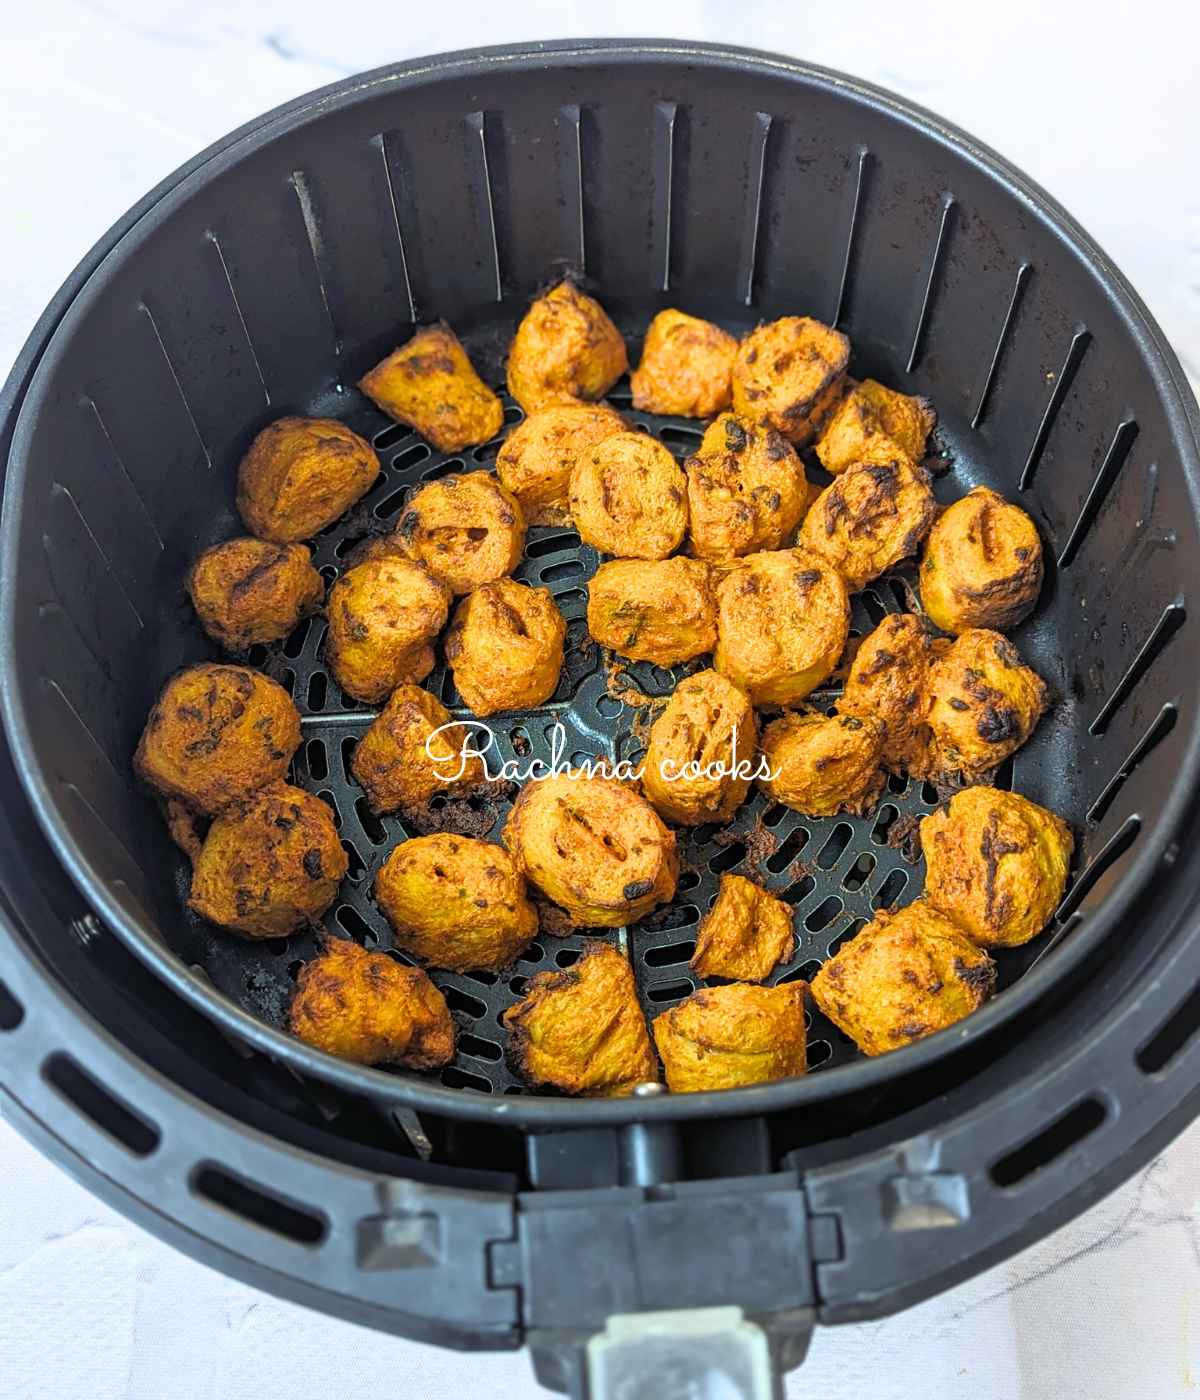 Browned and delicious tandoori soya chaap after air frying in air fryer basket.